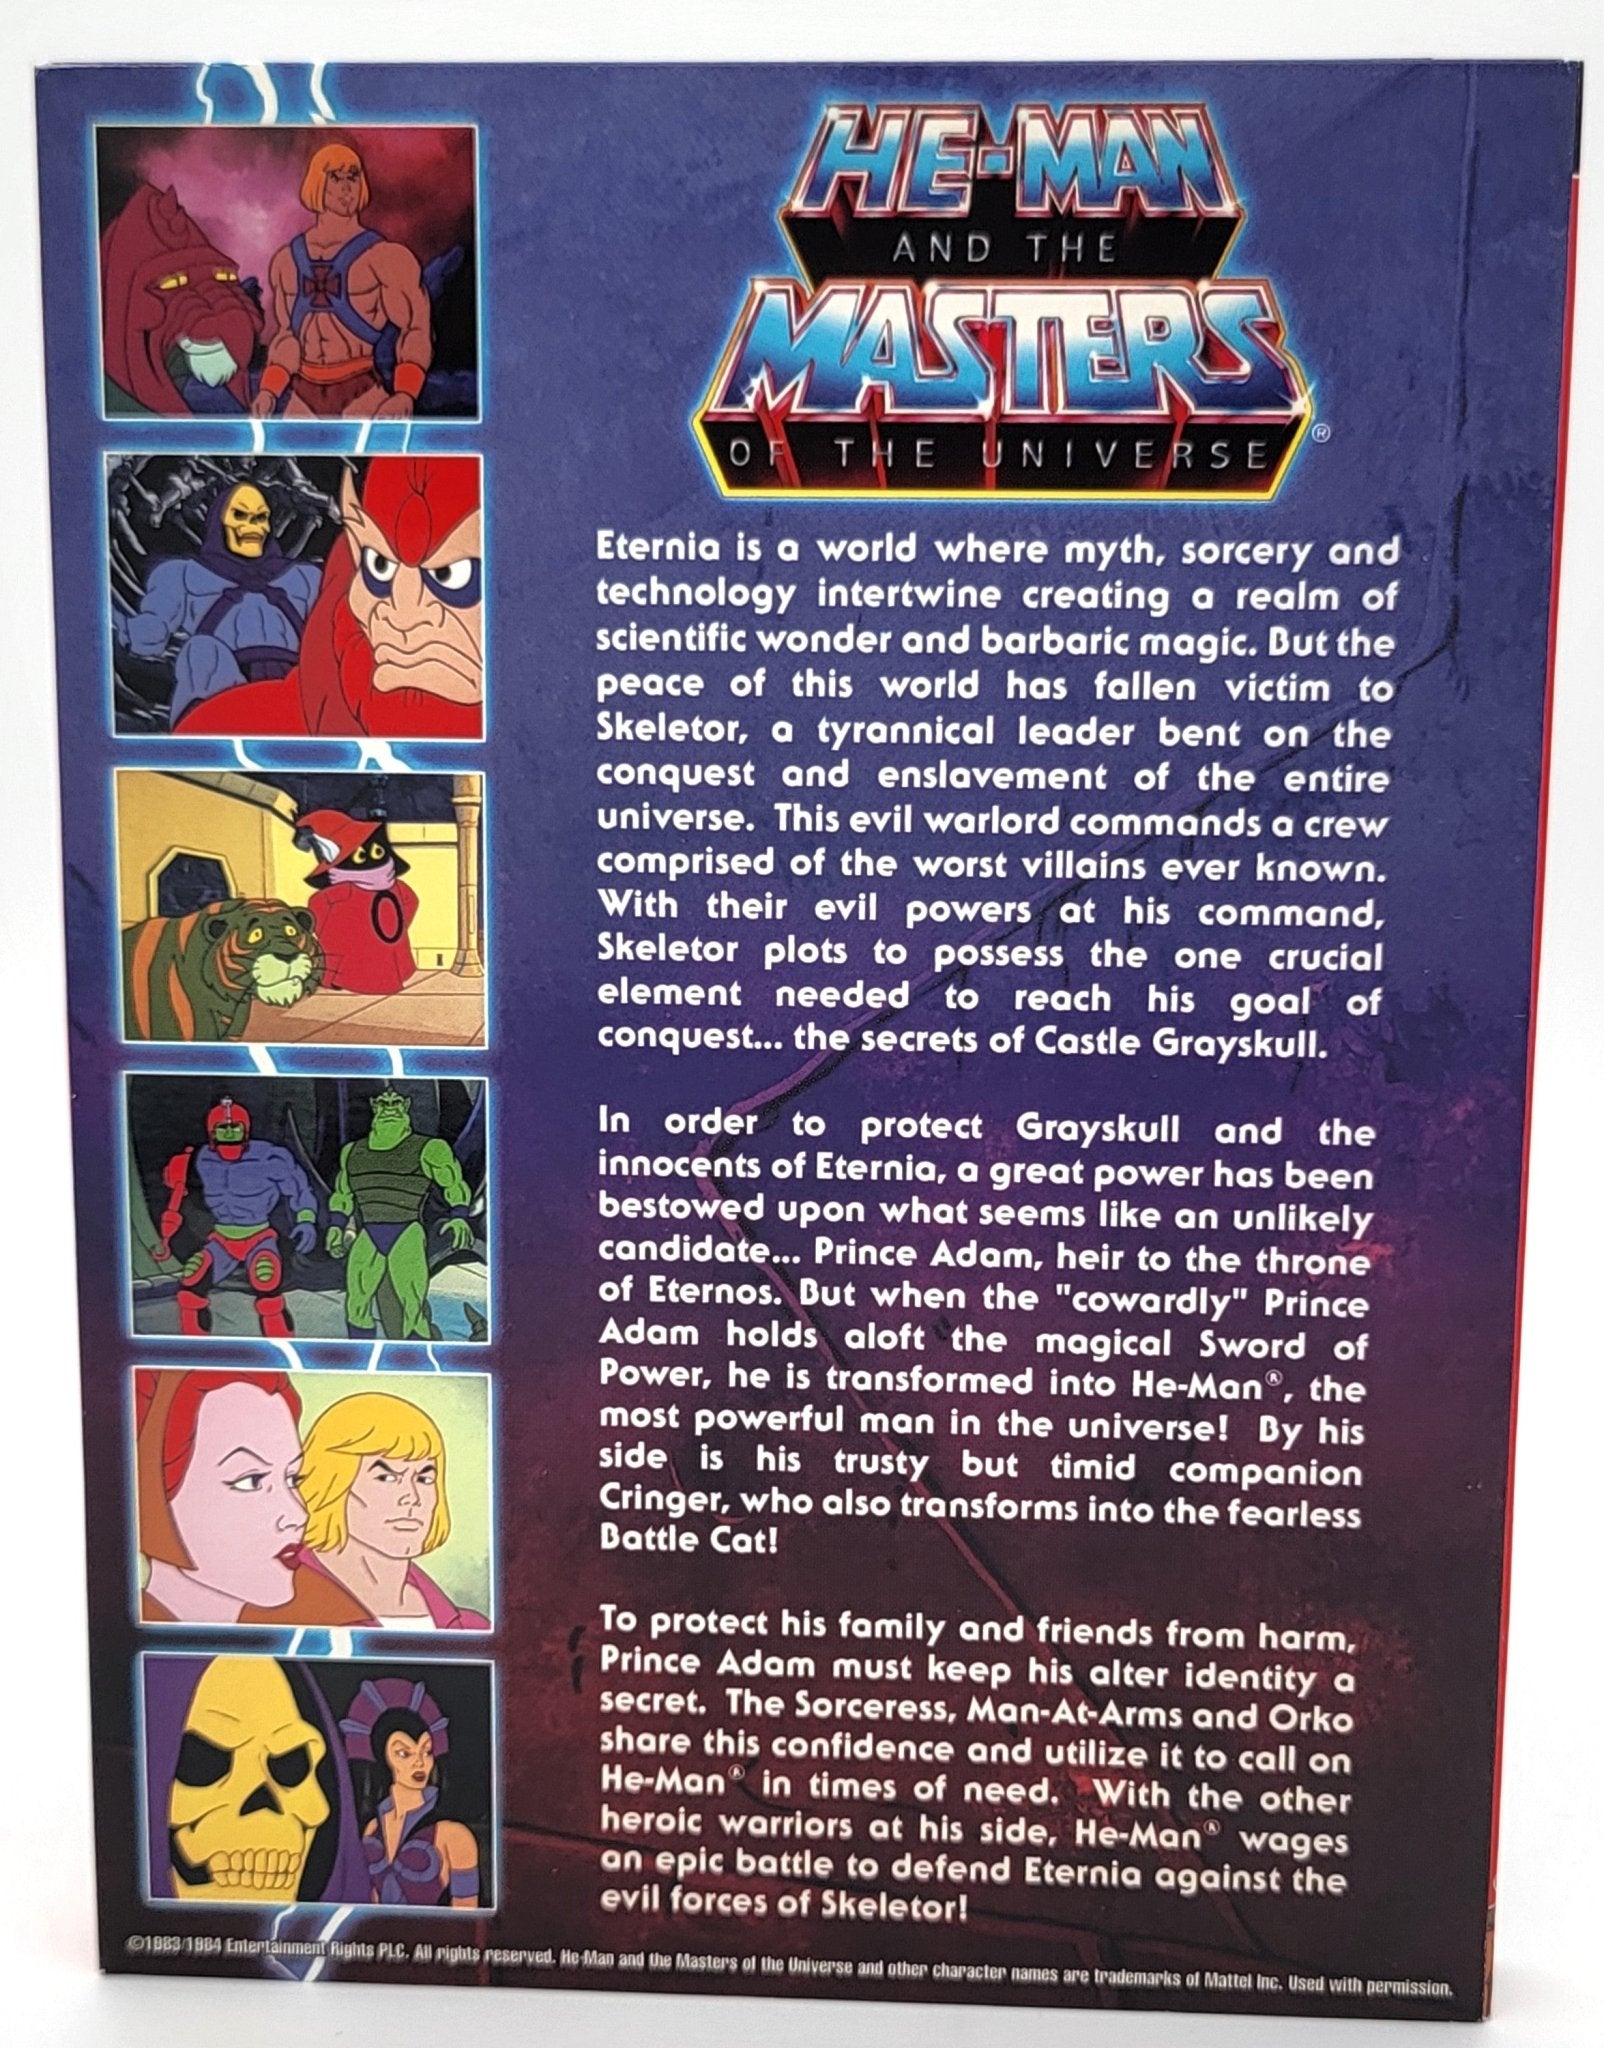 Bci / Eclipse - The Best of He-Man and the Masters of the Universe - 10 Episode Collector's Edition - DVD - Steady Bunny Shop